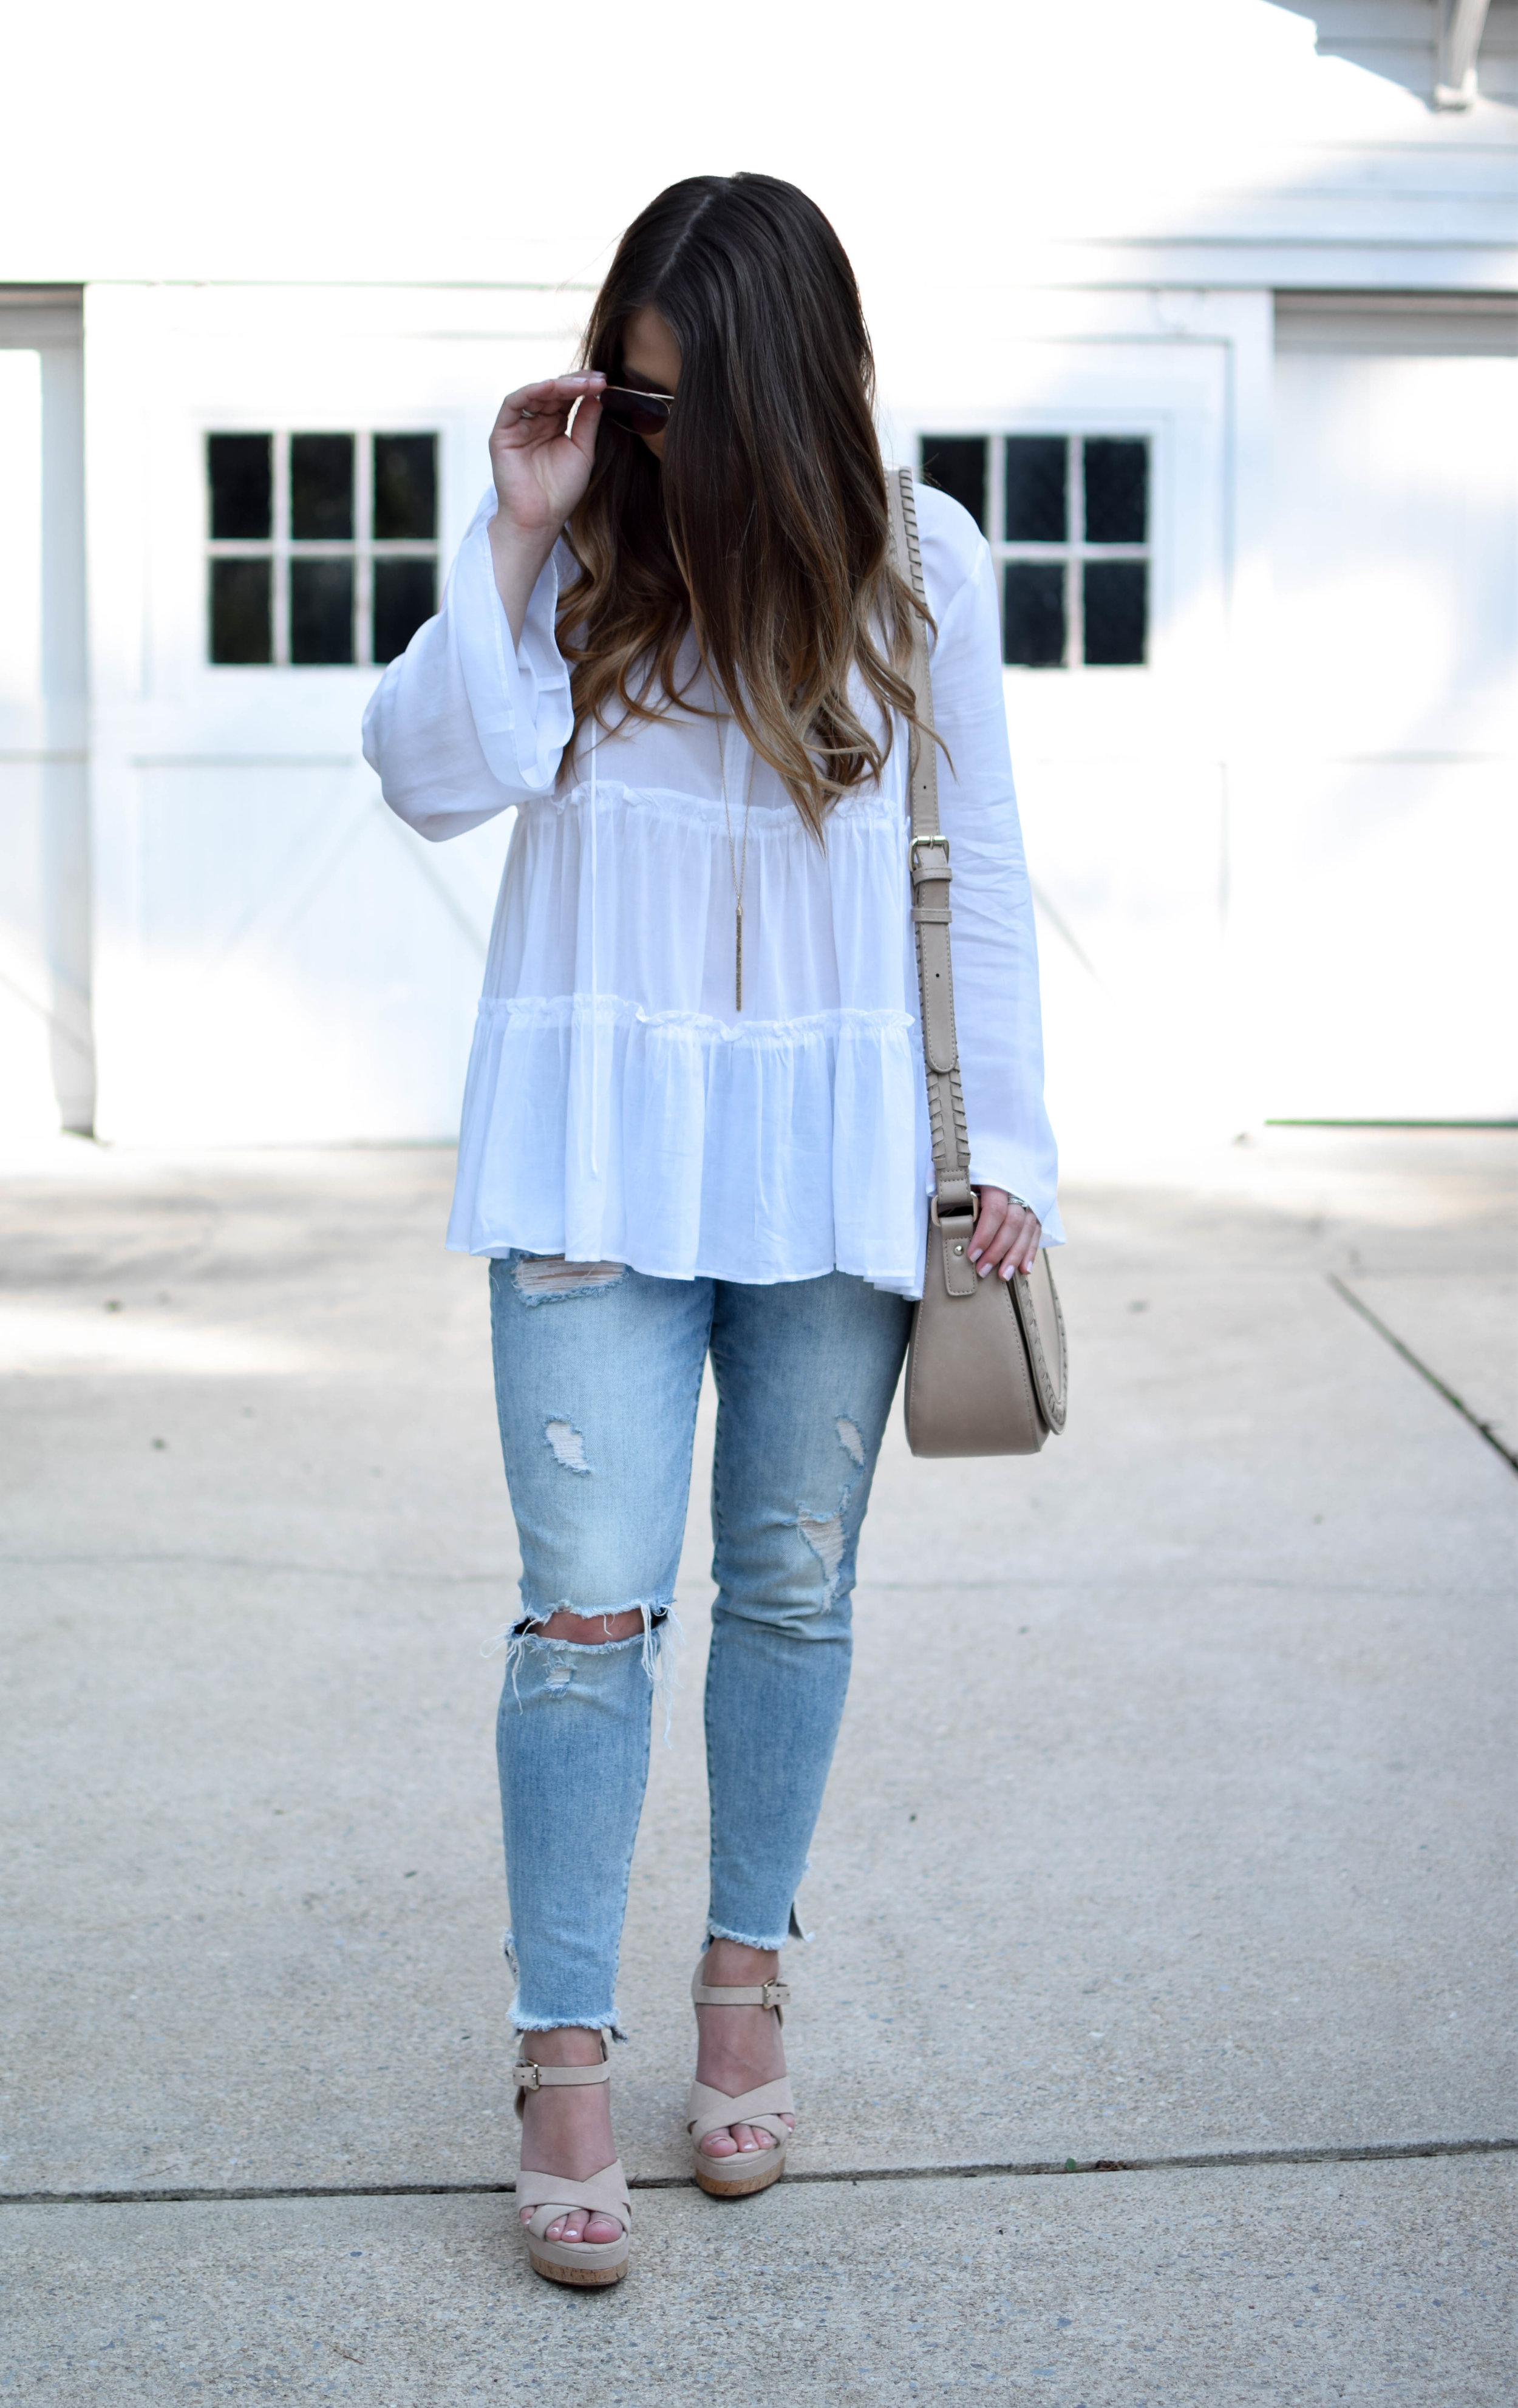 The Flowy White Top You Need in Your Closet ASAP | megan elise